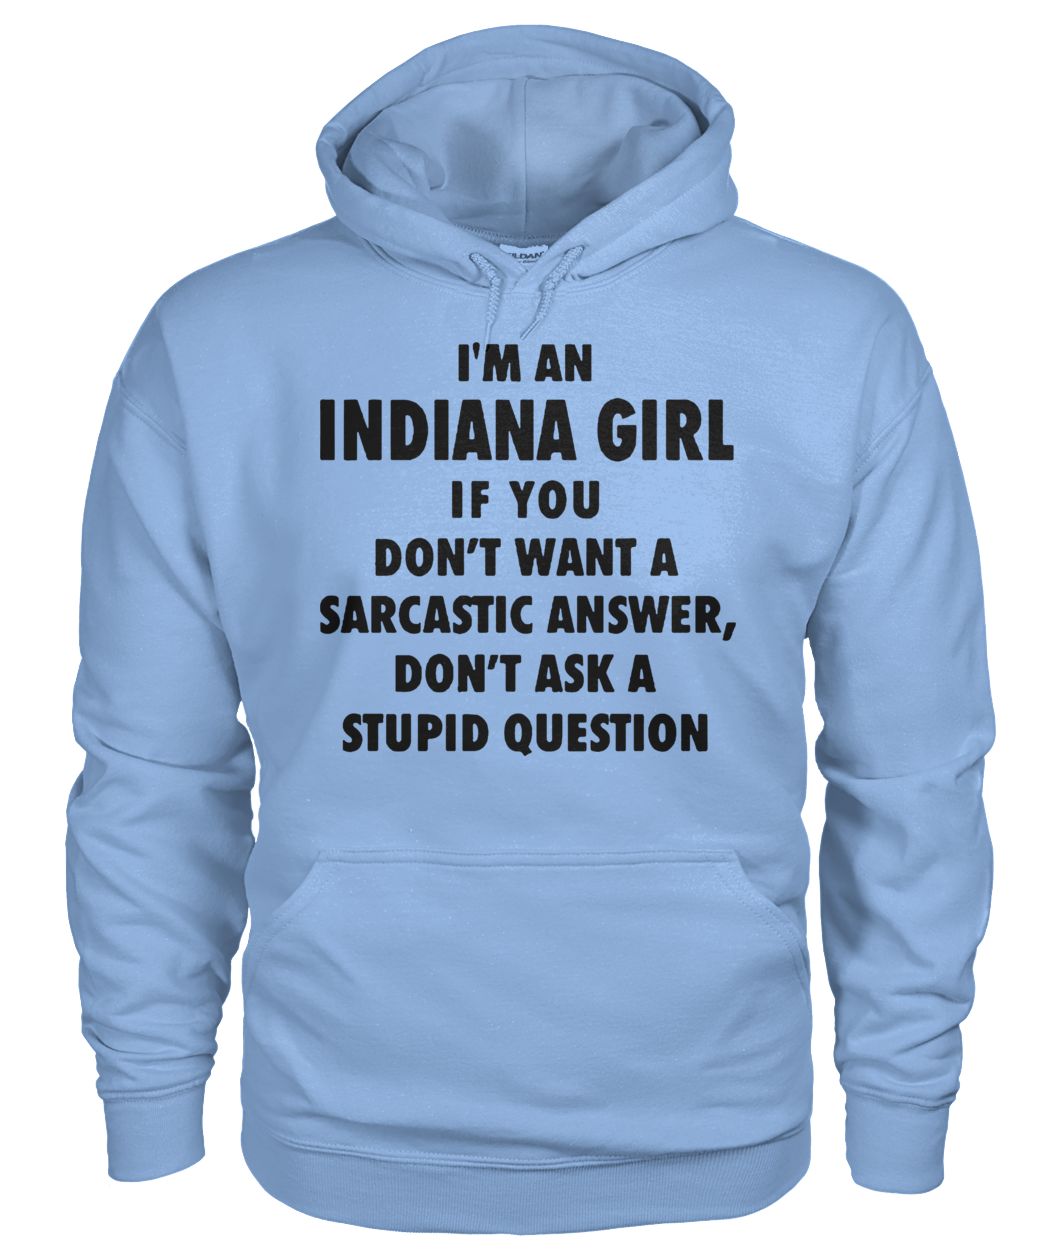 I'm an Indiana girl if you don't want a sarcastic answer don't ask a stupid question gildan hoodie